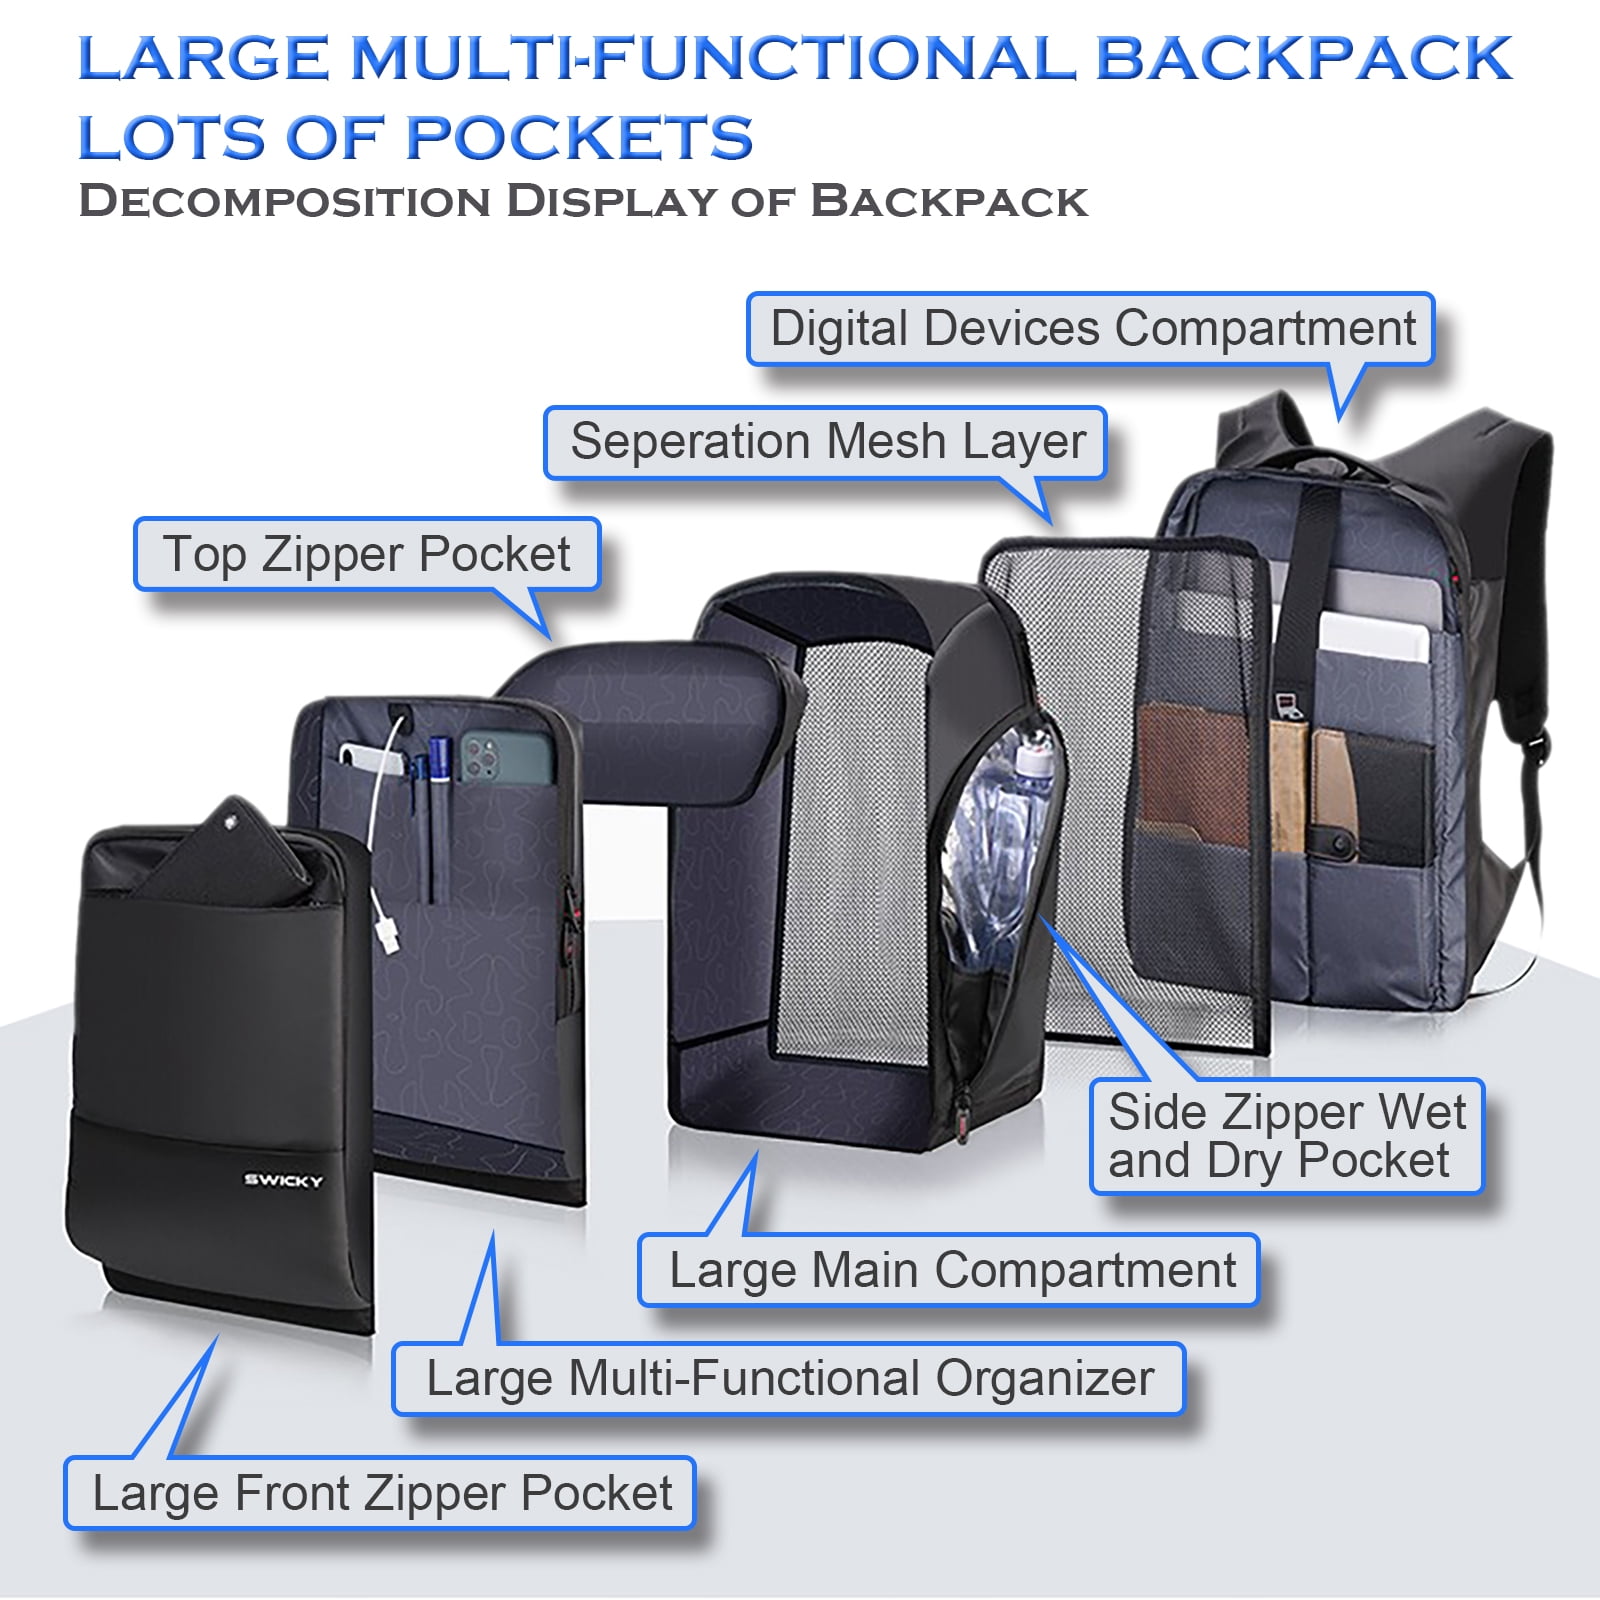 Backpack inner pocket 4 liters to attach, stackable, color-coded